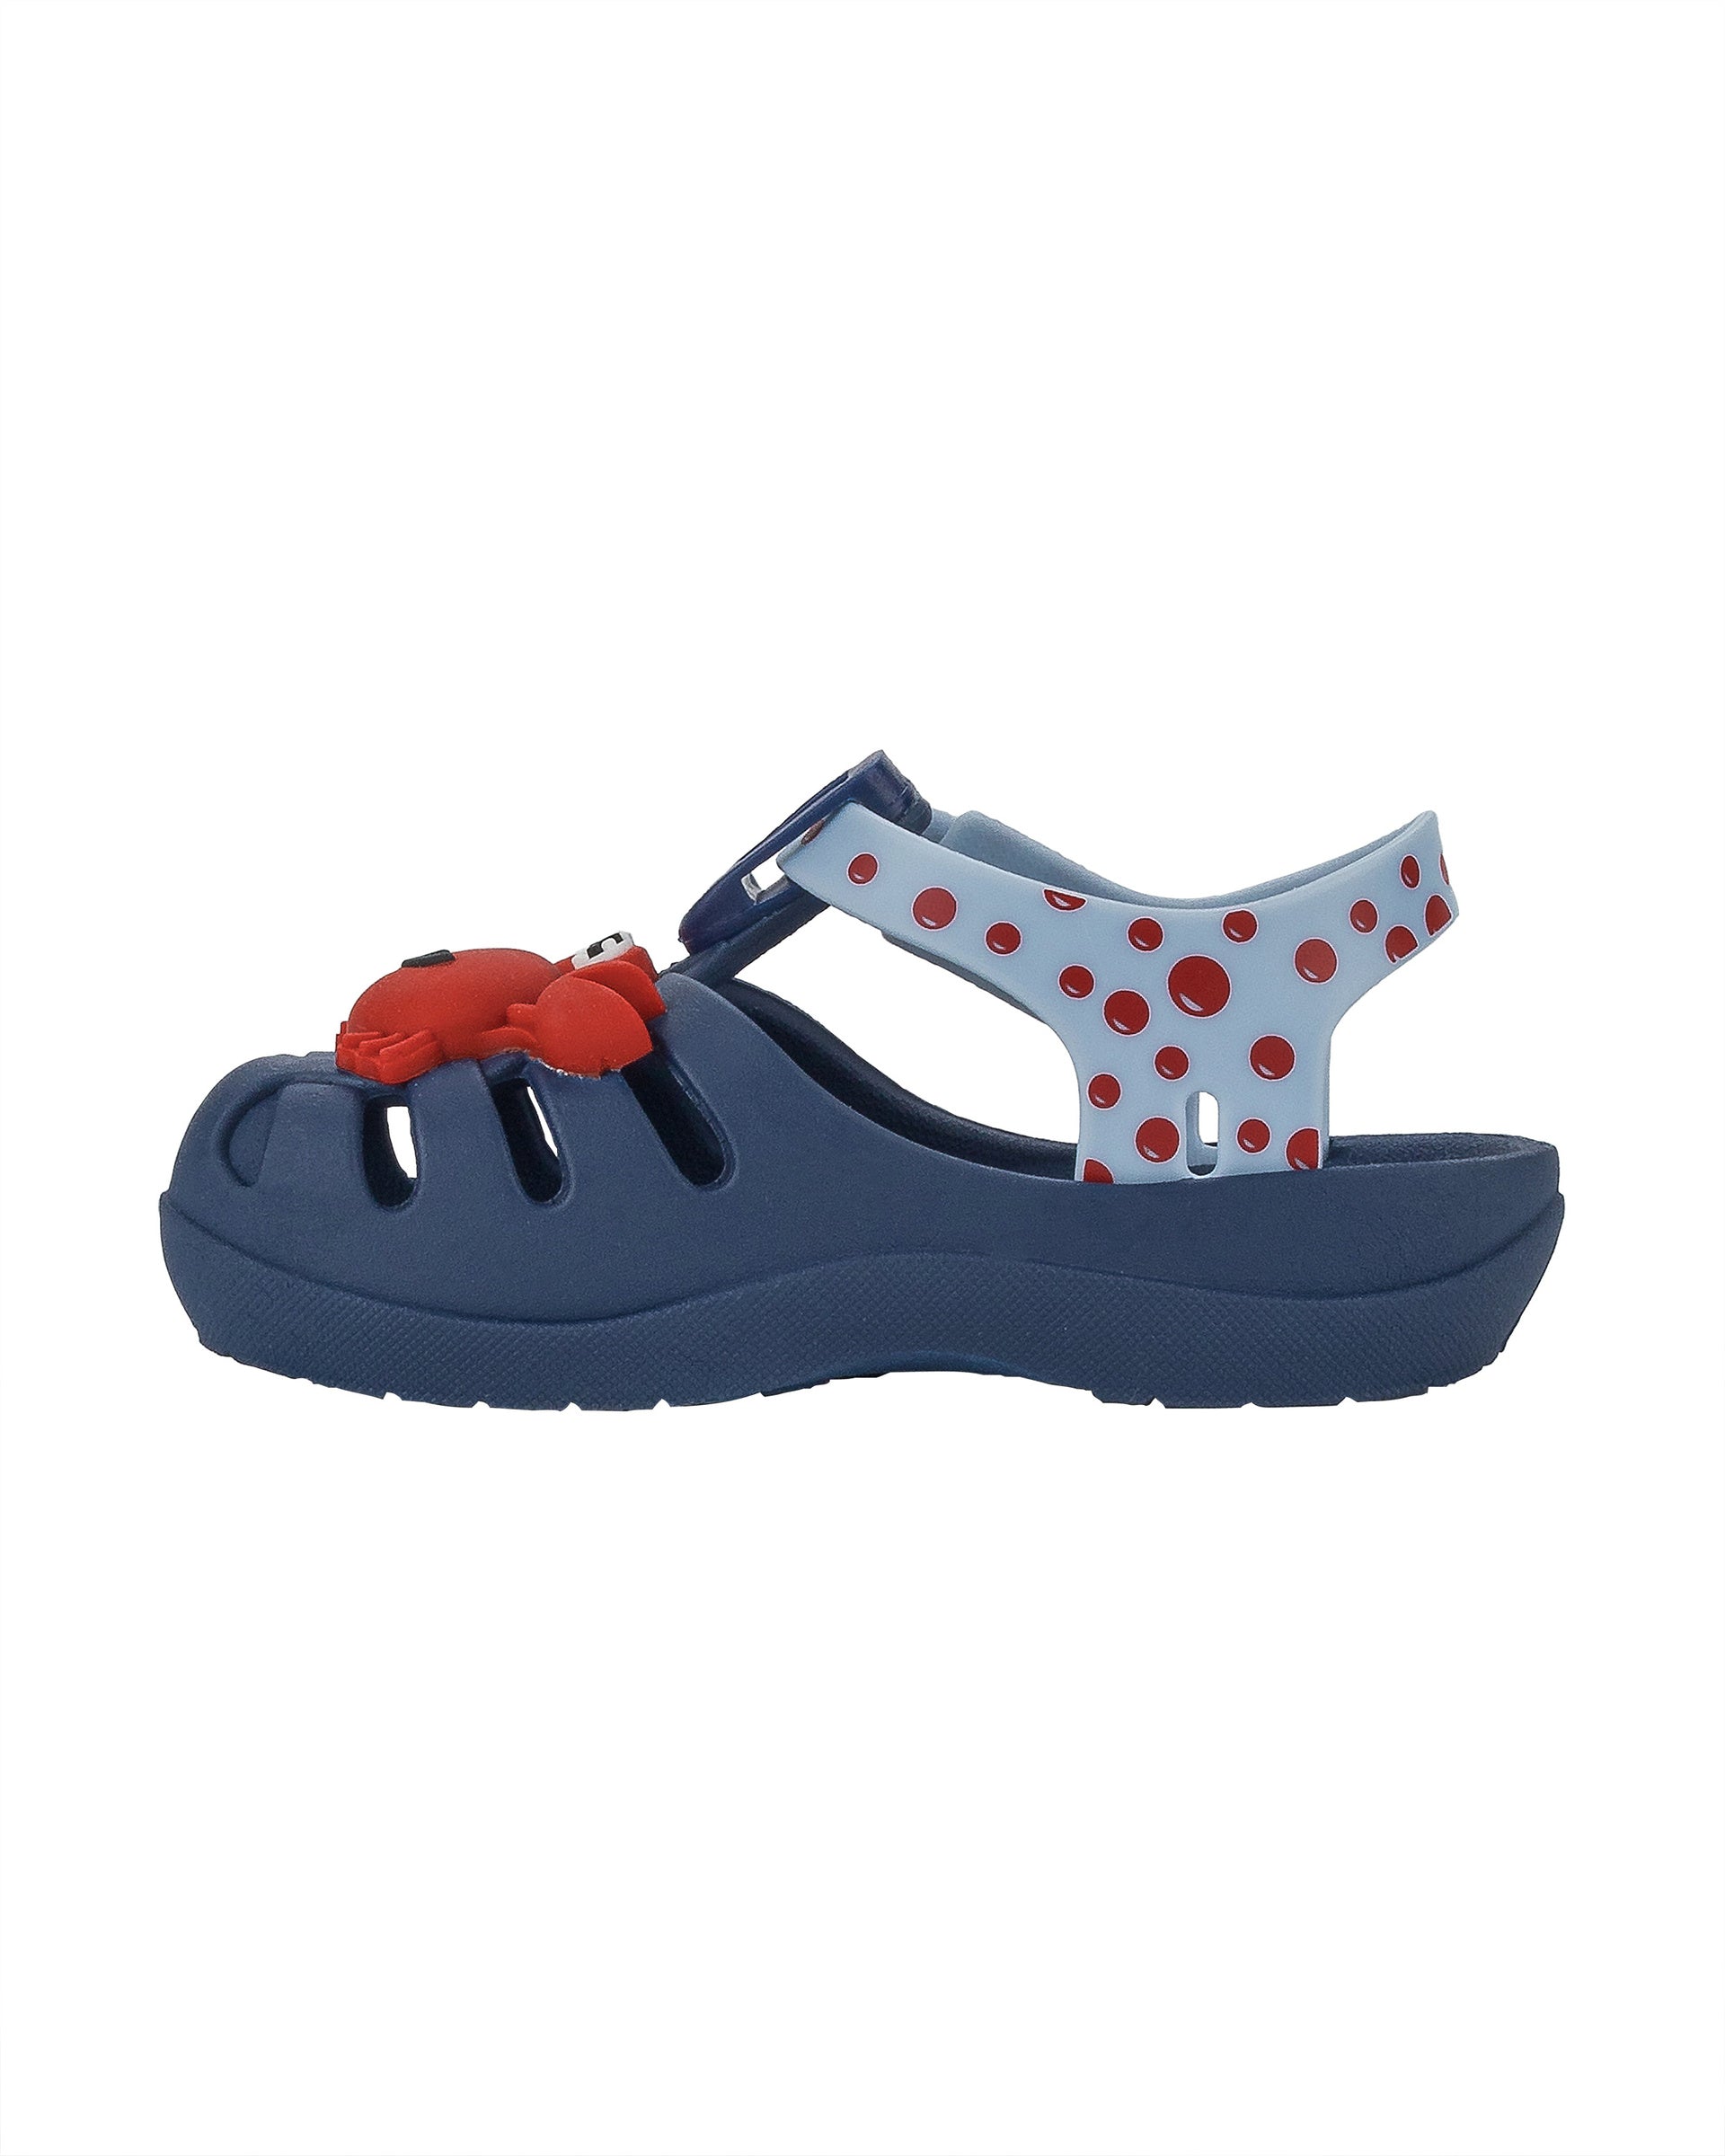 Inner side view of a blue/light blue Ipanema Summer baby fisherman sandal with red crab on the upper.